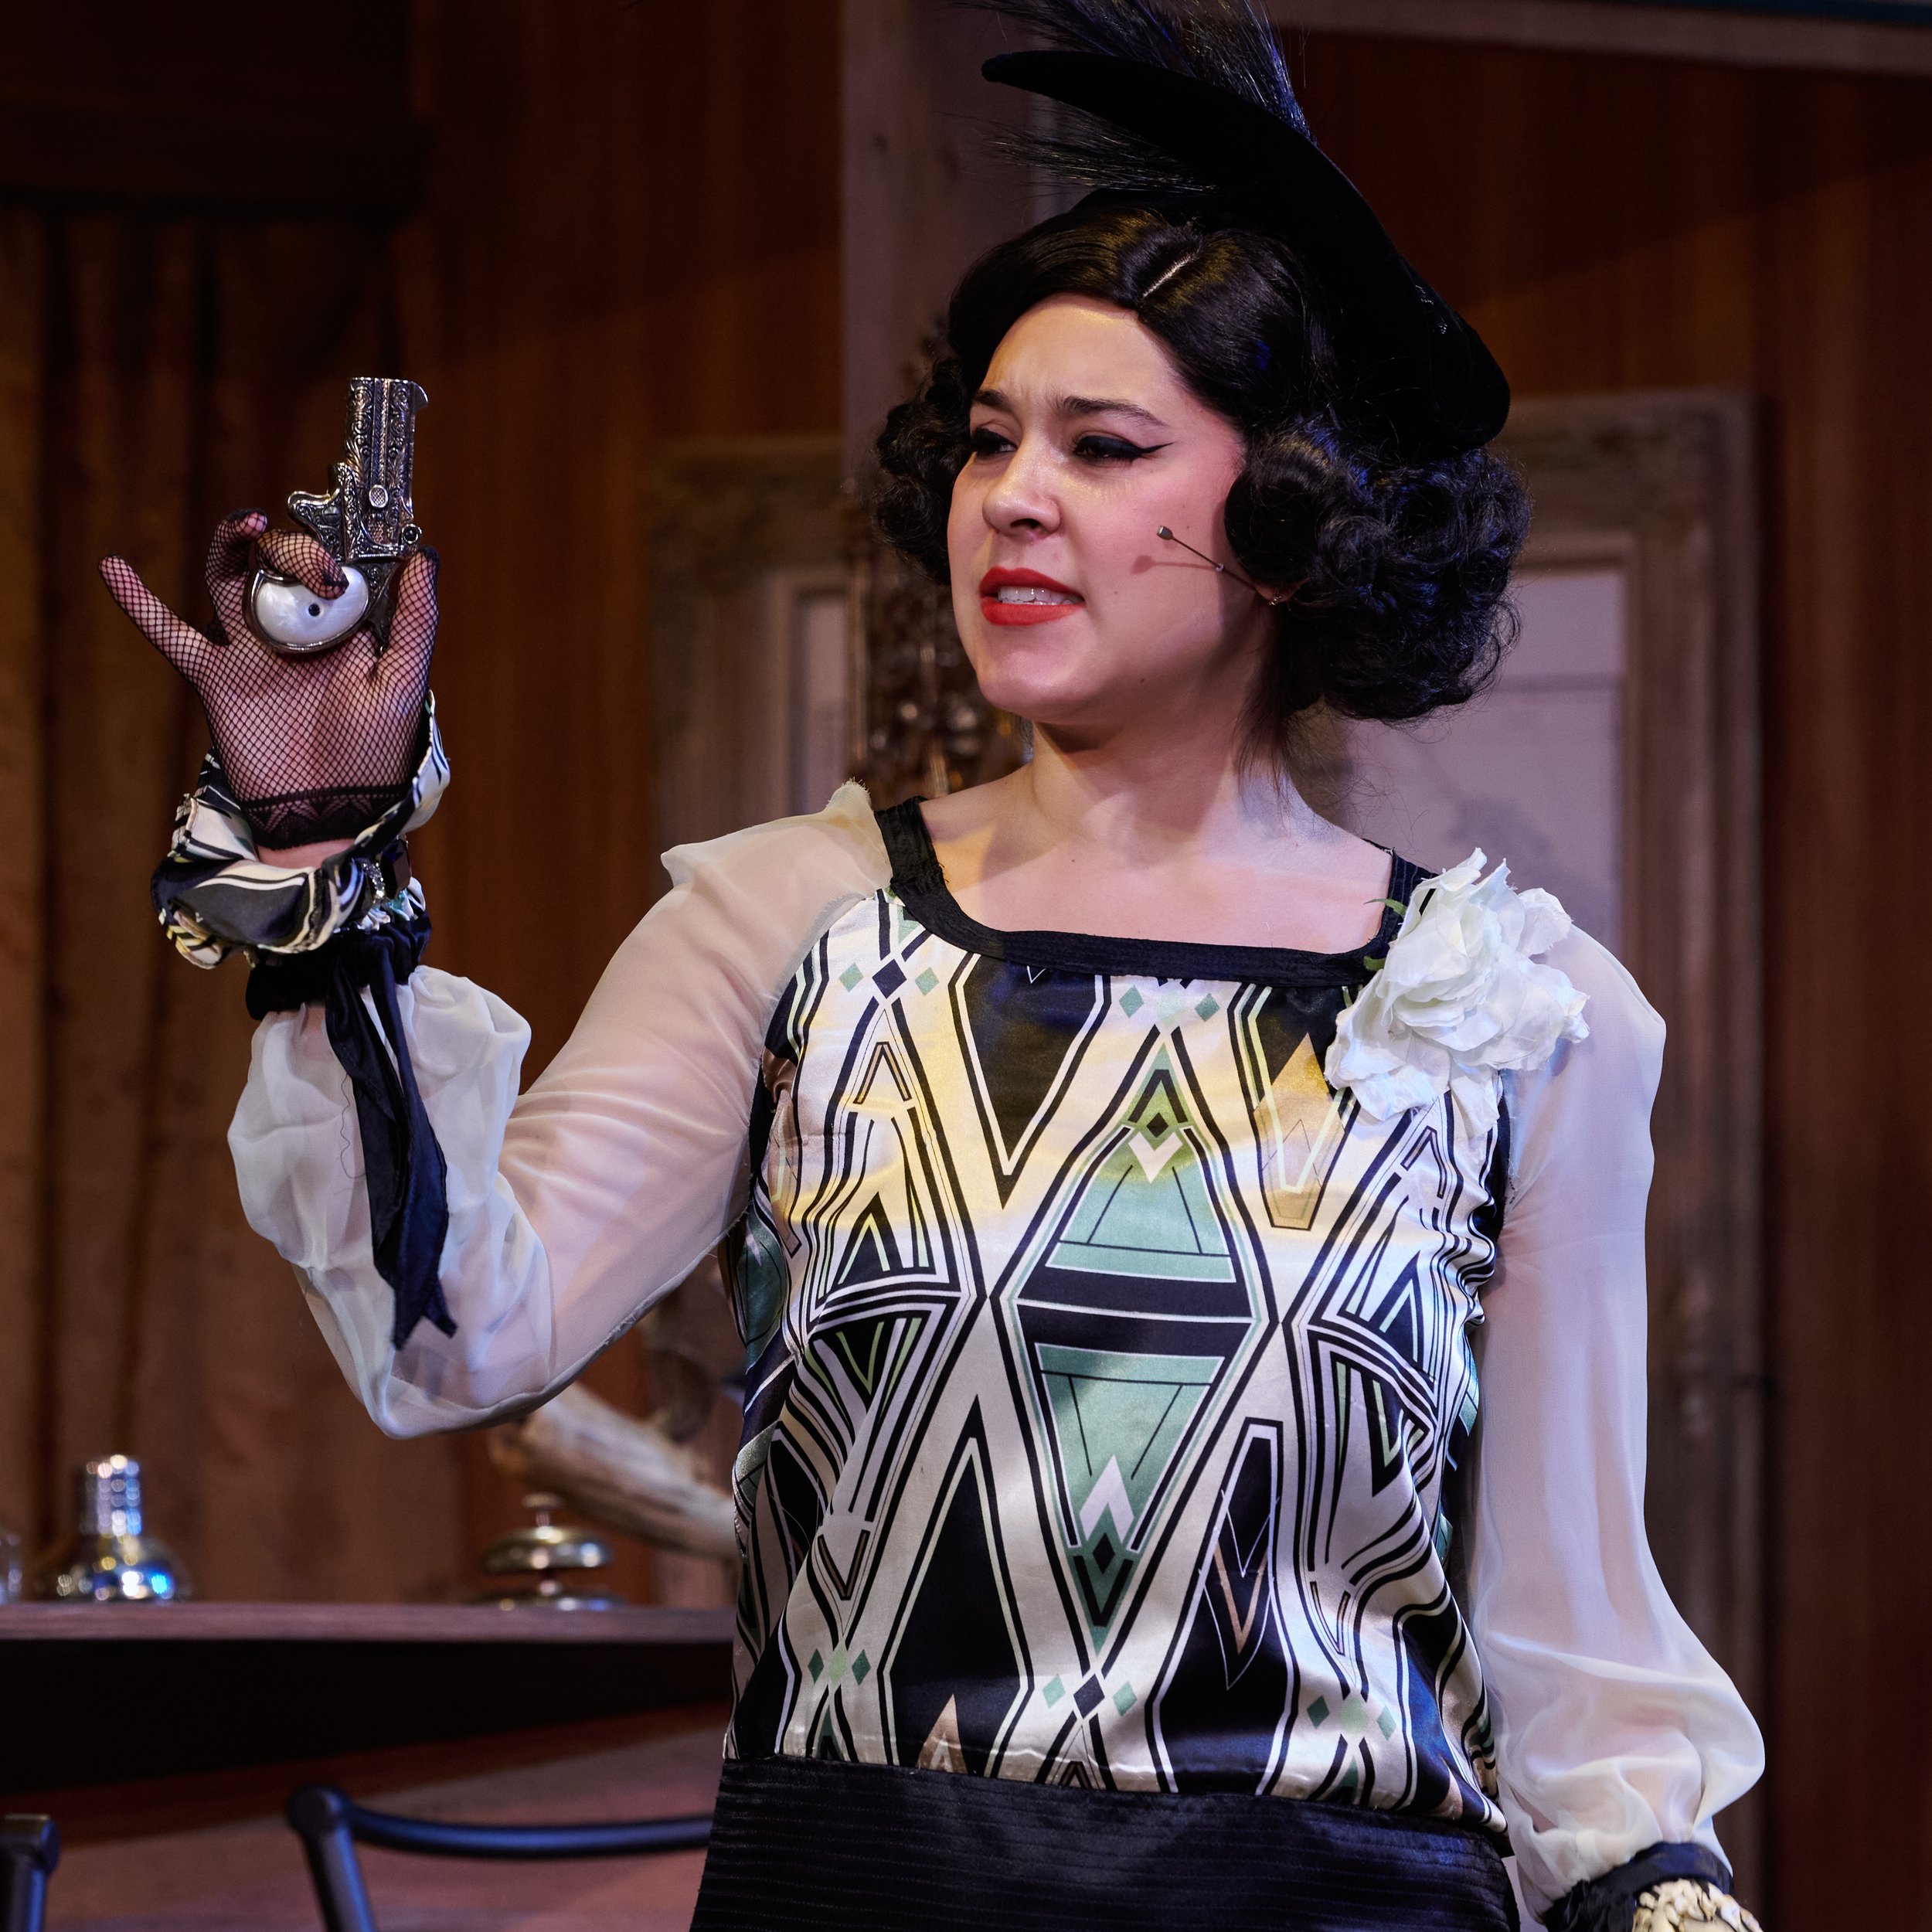  Kiana Spath as Jaqueline De Severac during dress rehearsal of the Santa Monica College Theatre Arts Department production of Agatha Christie's "Murder on the Nile" at the SMC Main Stage on Thursday, May 26, 2023, in Santa Monica, Calif. (Nicholas Mc